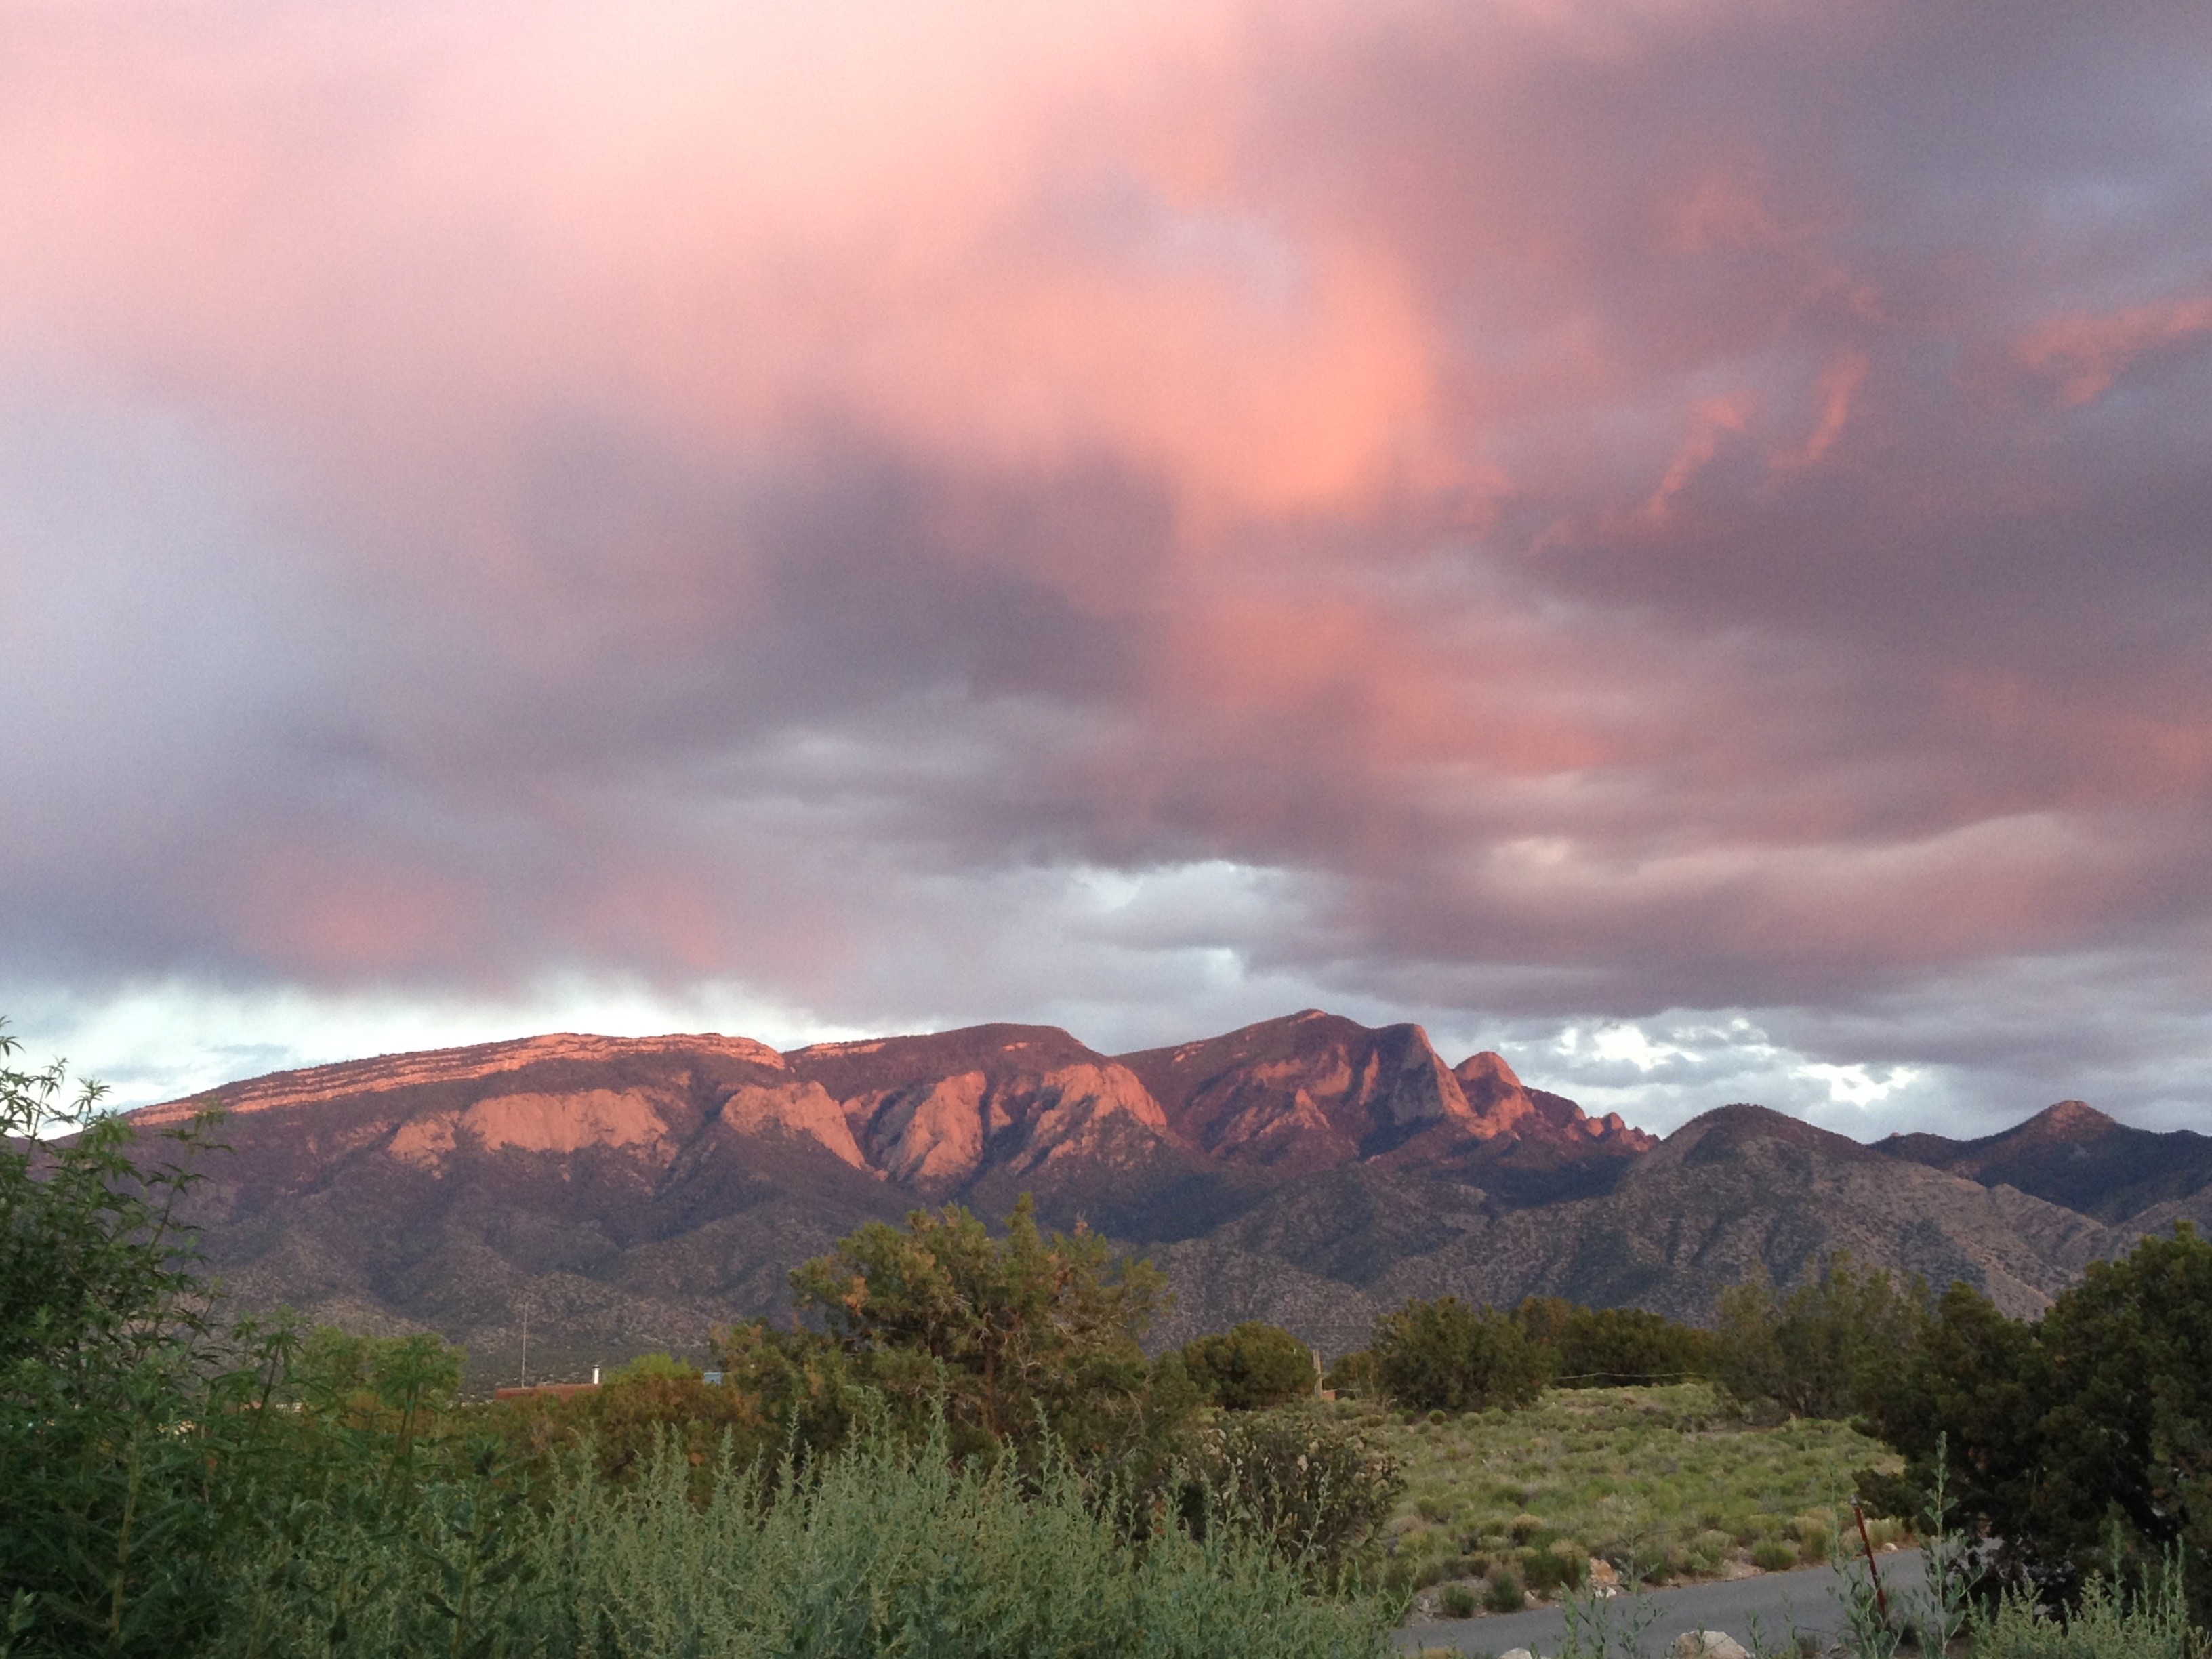 View of Sandia Mountains on a cloudy sunset, mountain face and clouds lit up bright pink.